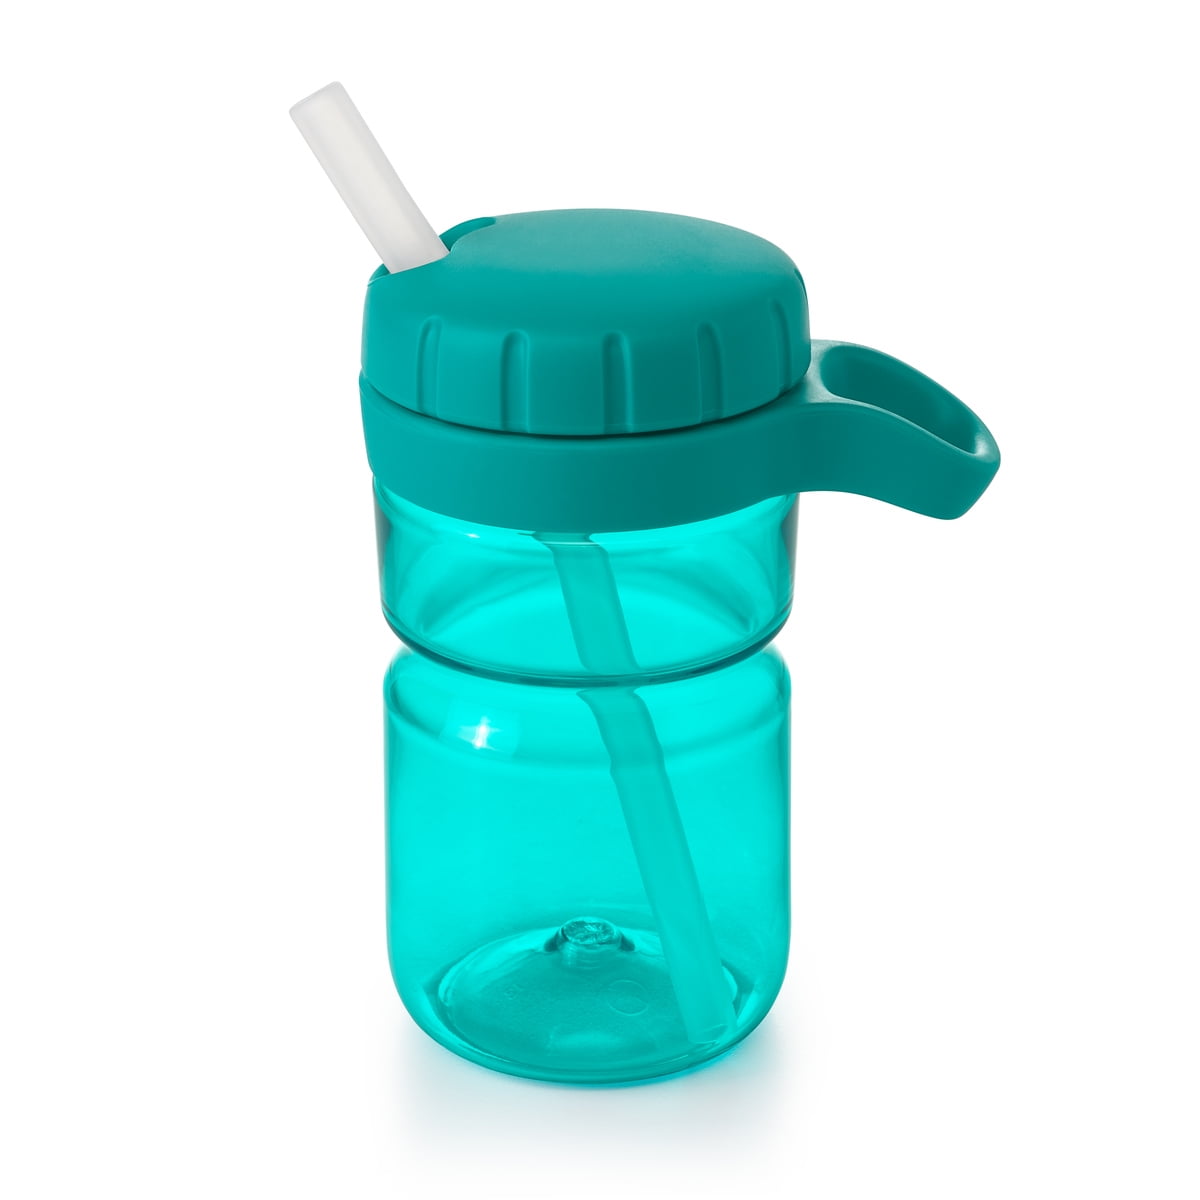 Oxo Tot Drain Stopper - Teal - Imported Products from USA - iBhejo